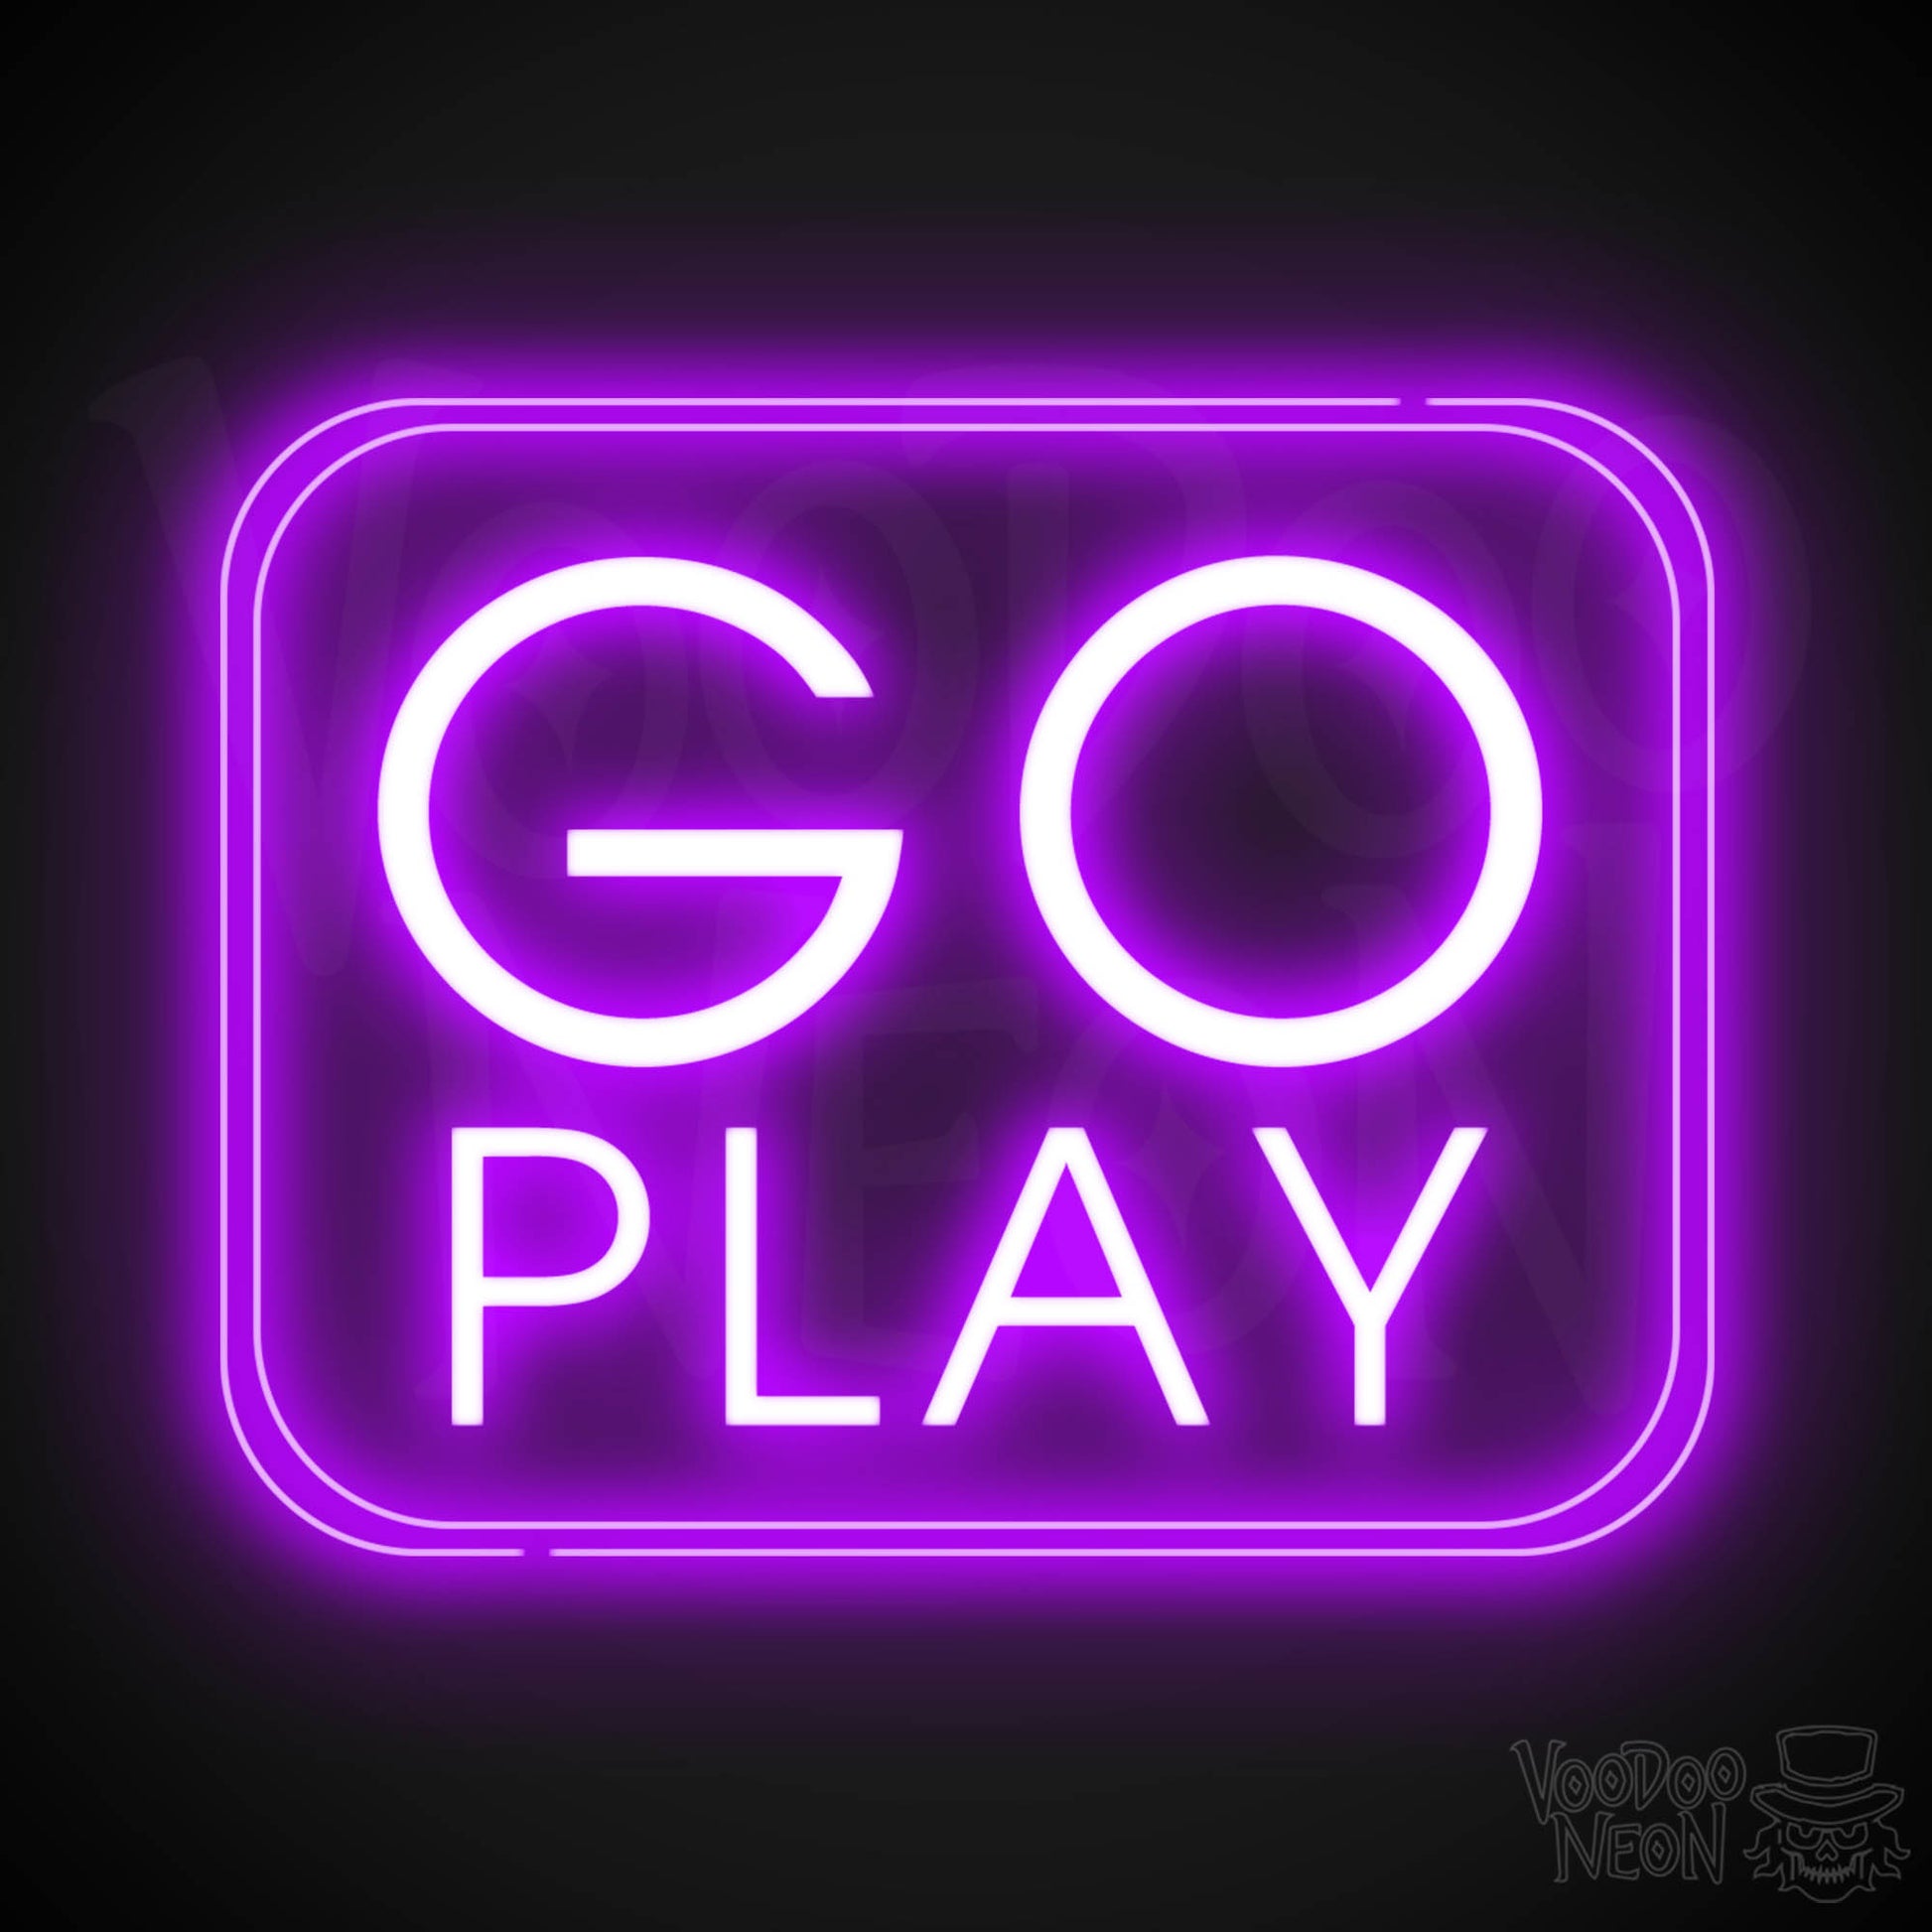 Go Play Neon Sign - Neon Go Play Sign - LED Wall Art - Color Purple